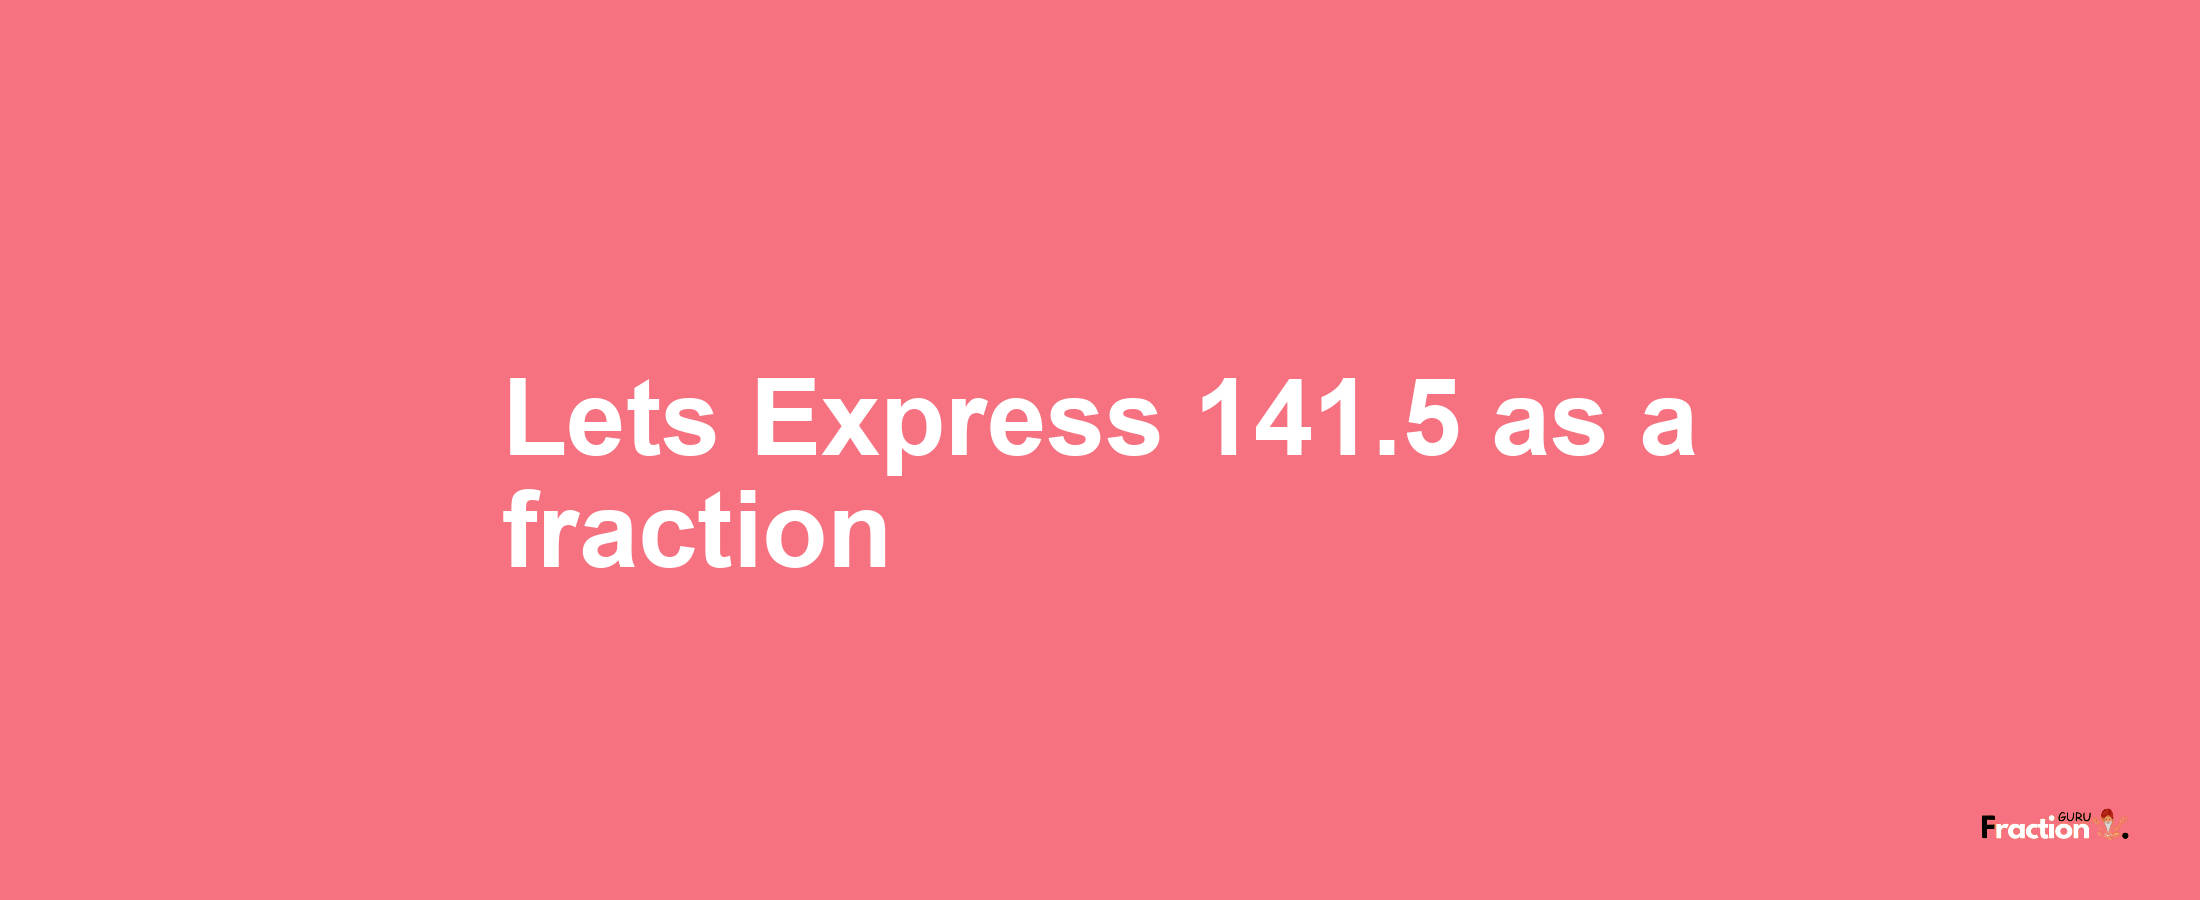 Lets Express 141.5 as afraction